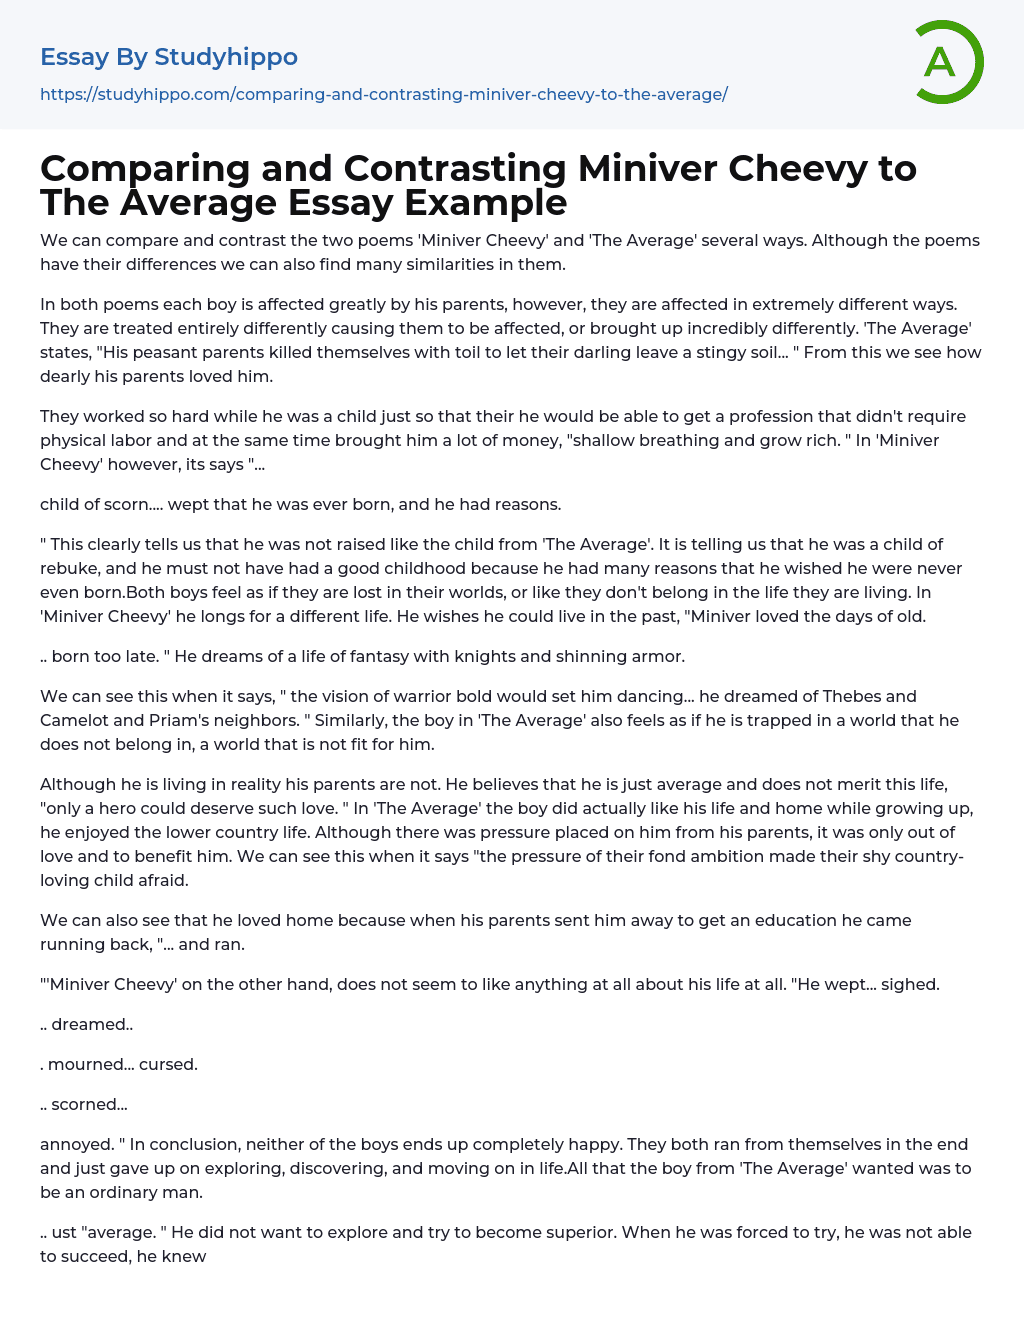 Comparing and Contrasting Miniver Cheevy to The Average Essay Example